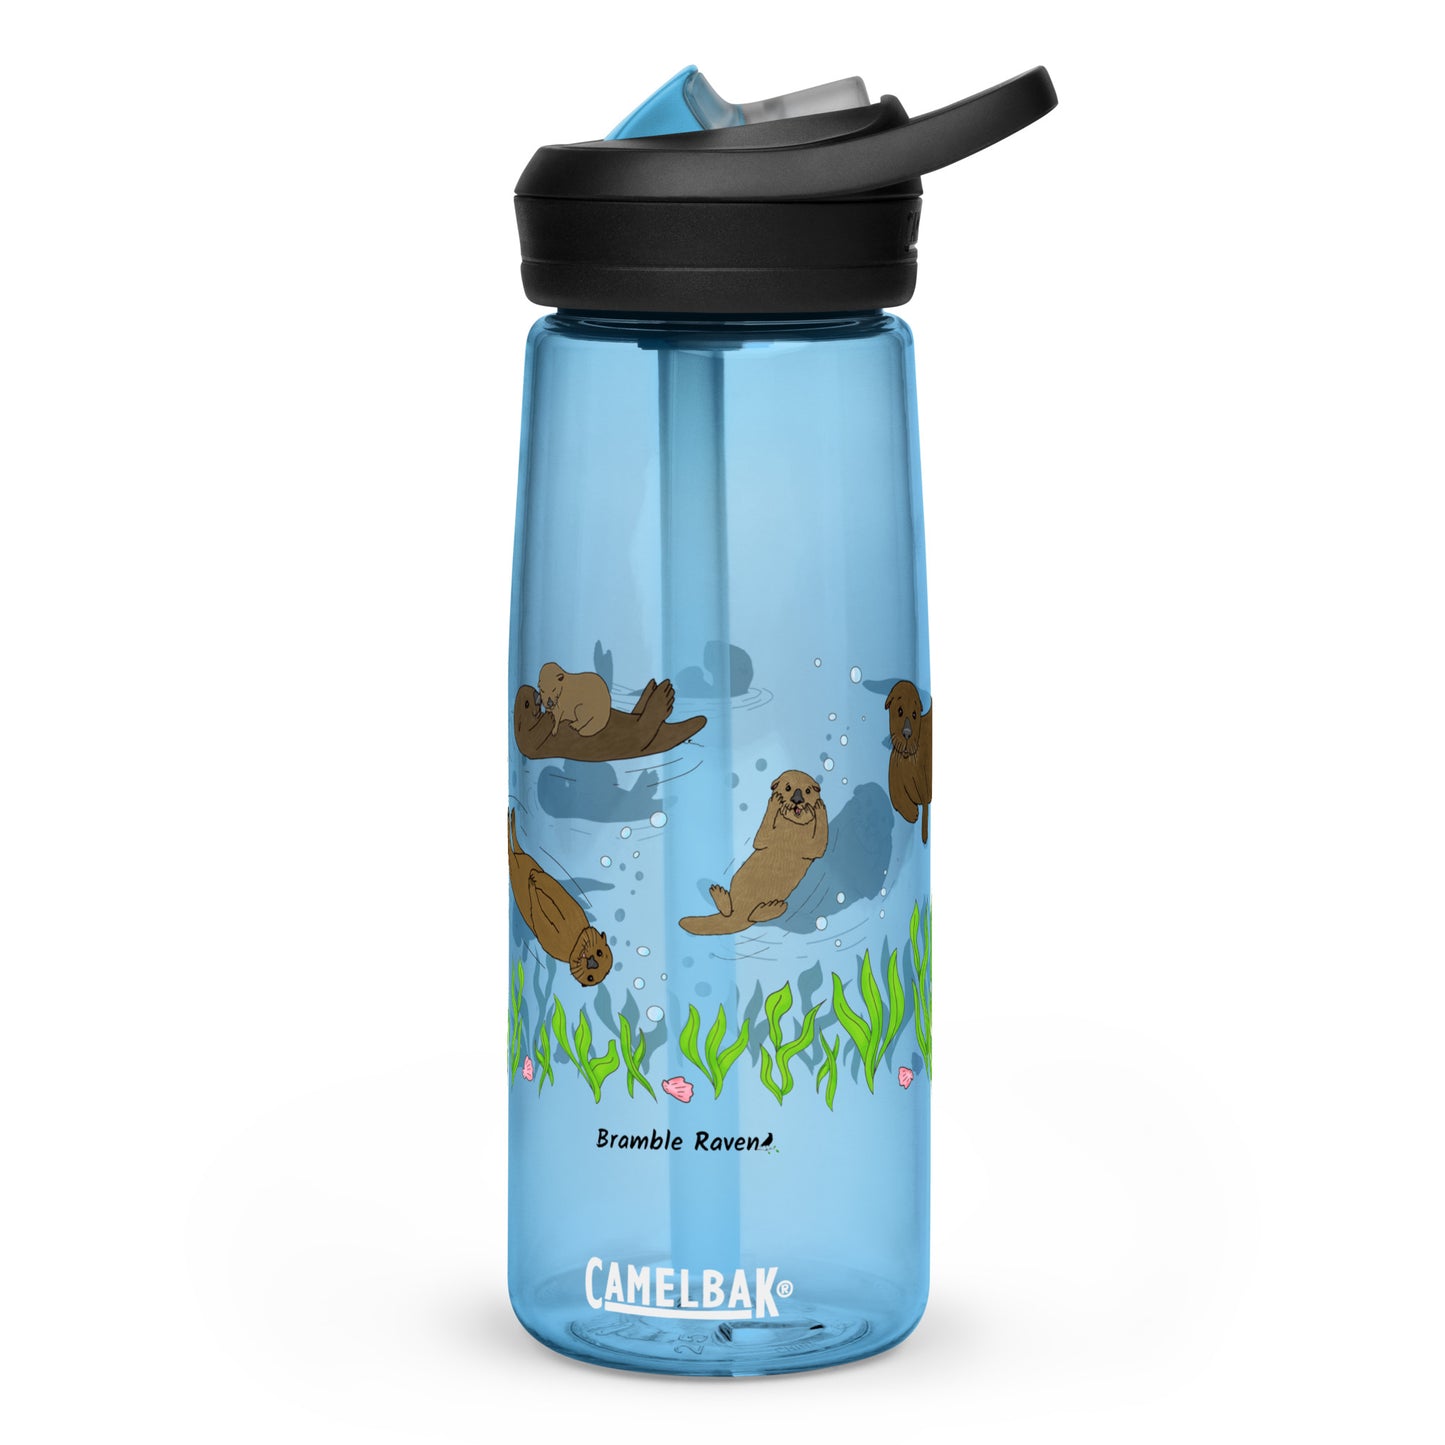 25 ounce sports water bottle with spill proof lid and bite valve. Light blue stain and odor-resistant BPA-free plastic with sea otter designs around the bottle, swimming above the seaweed and shells.